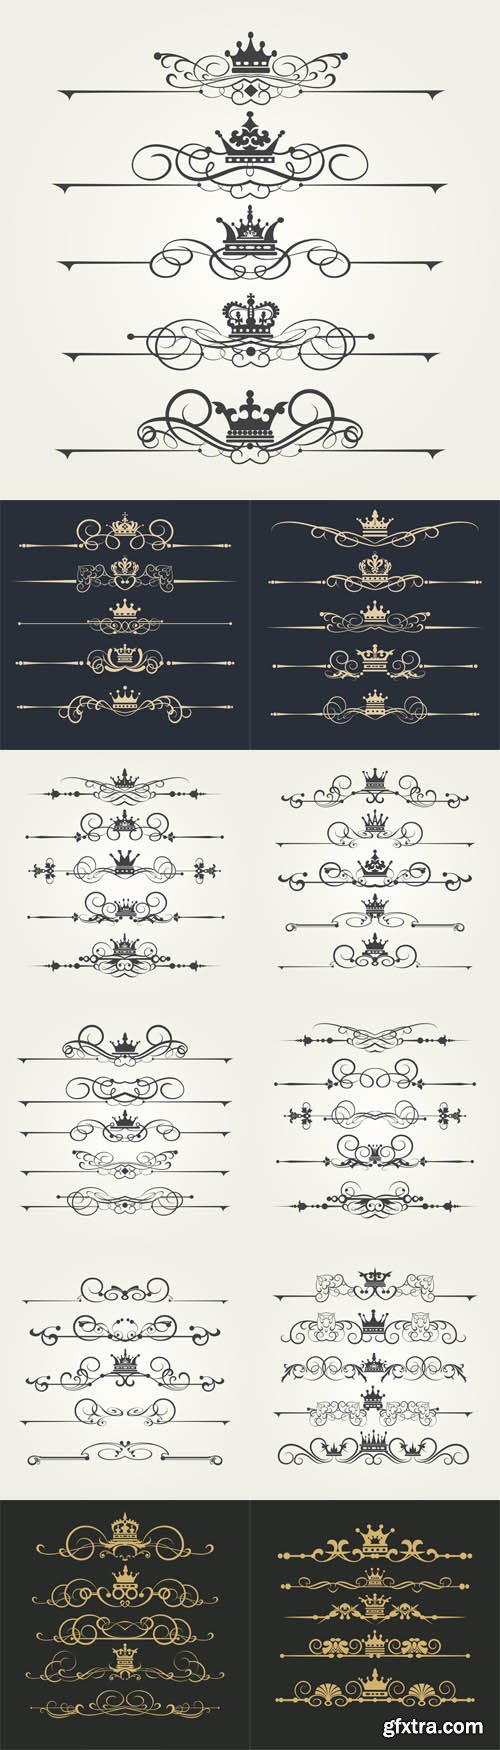 Vector Set - Victorian Scrolls and Crown. Decorative Elements